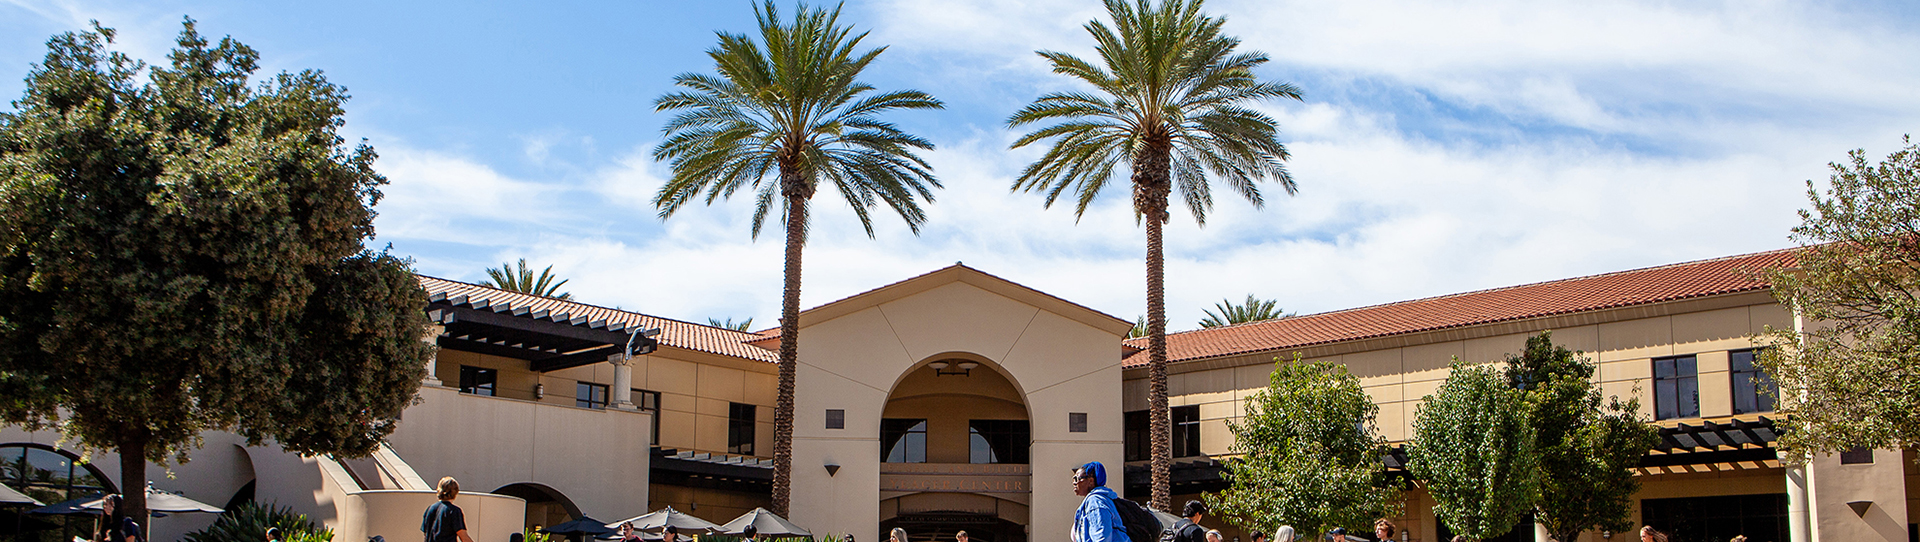 California Baptist University sees enrollment growth for the 23rd consecutive year